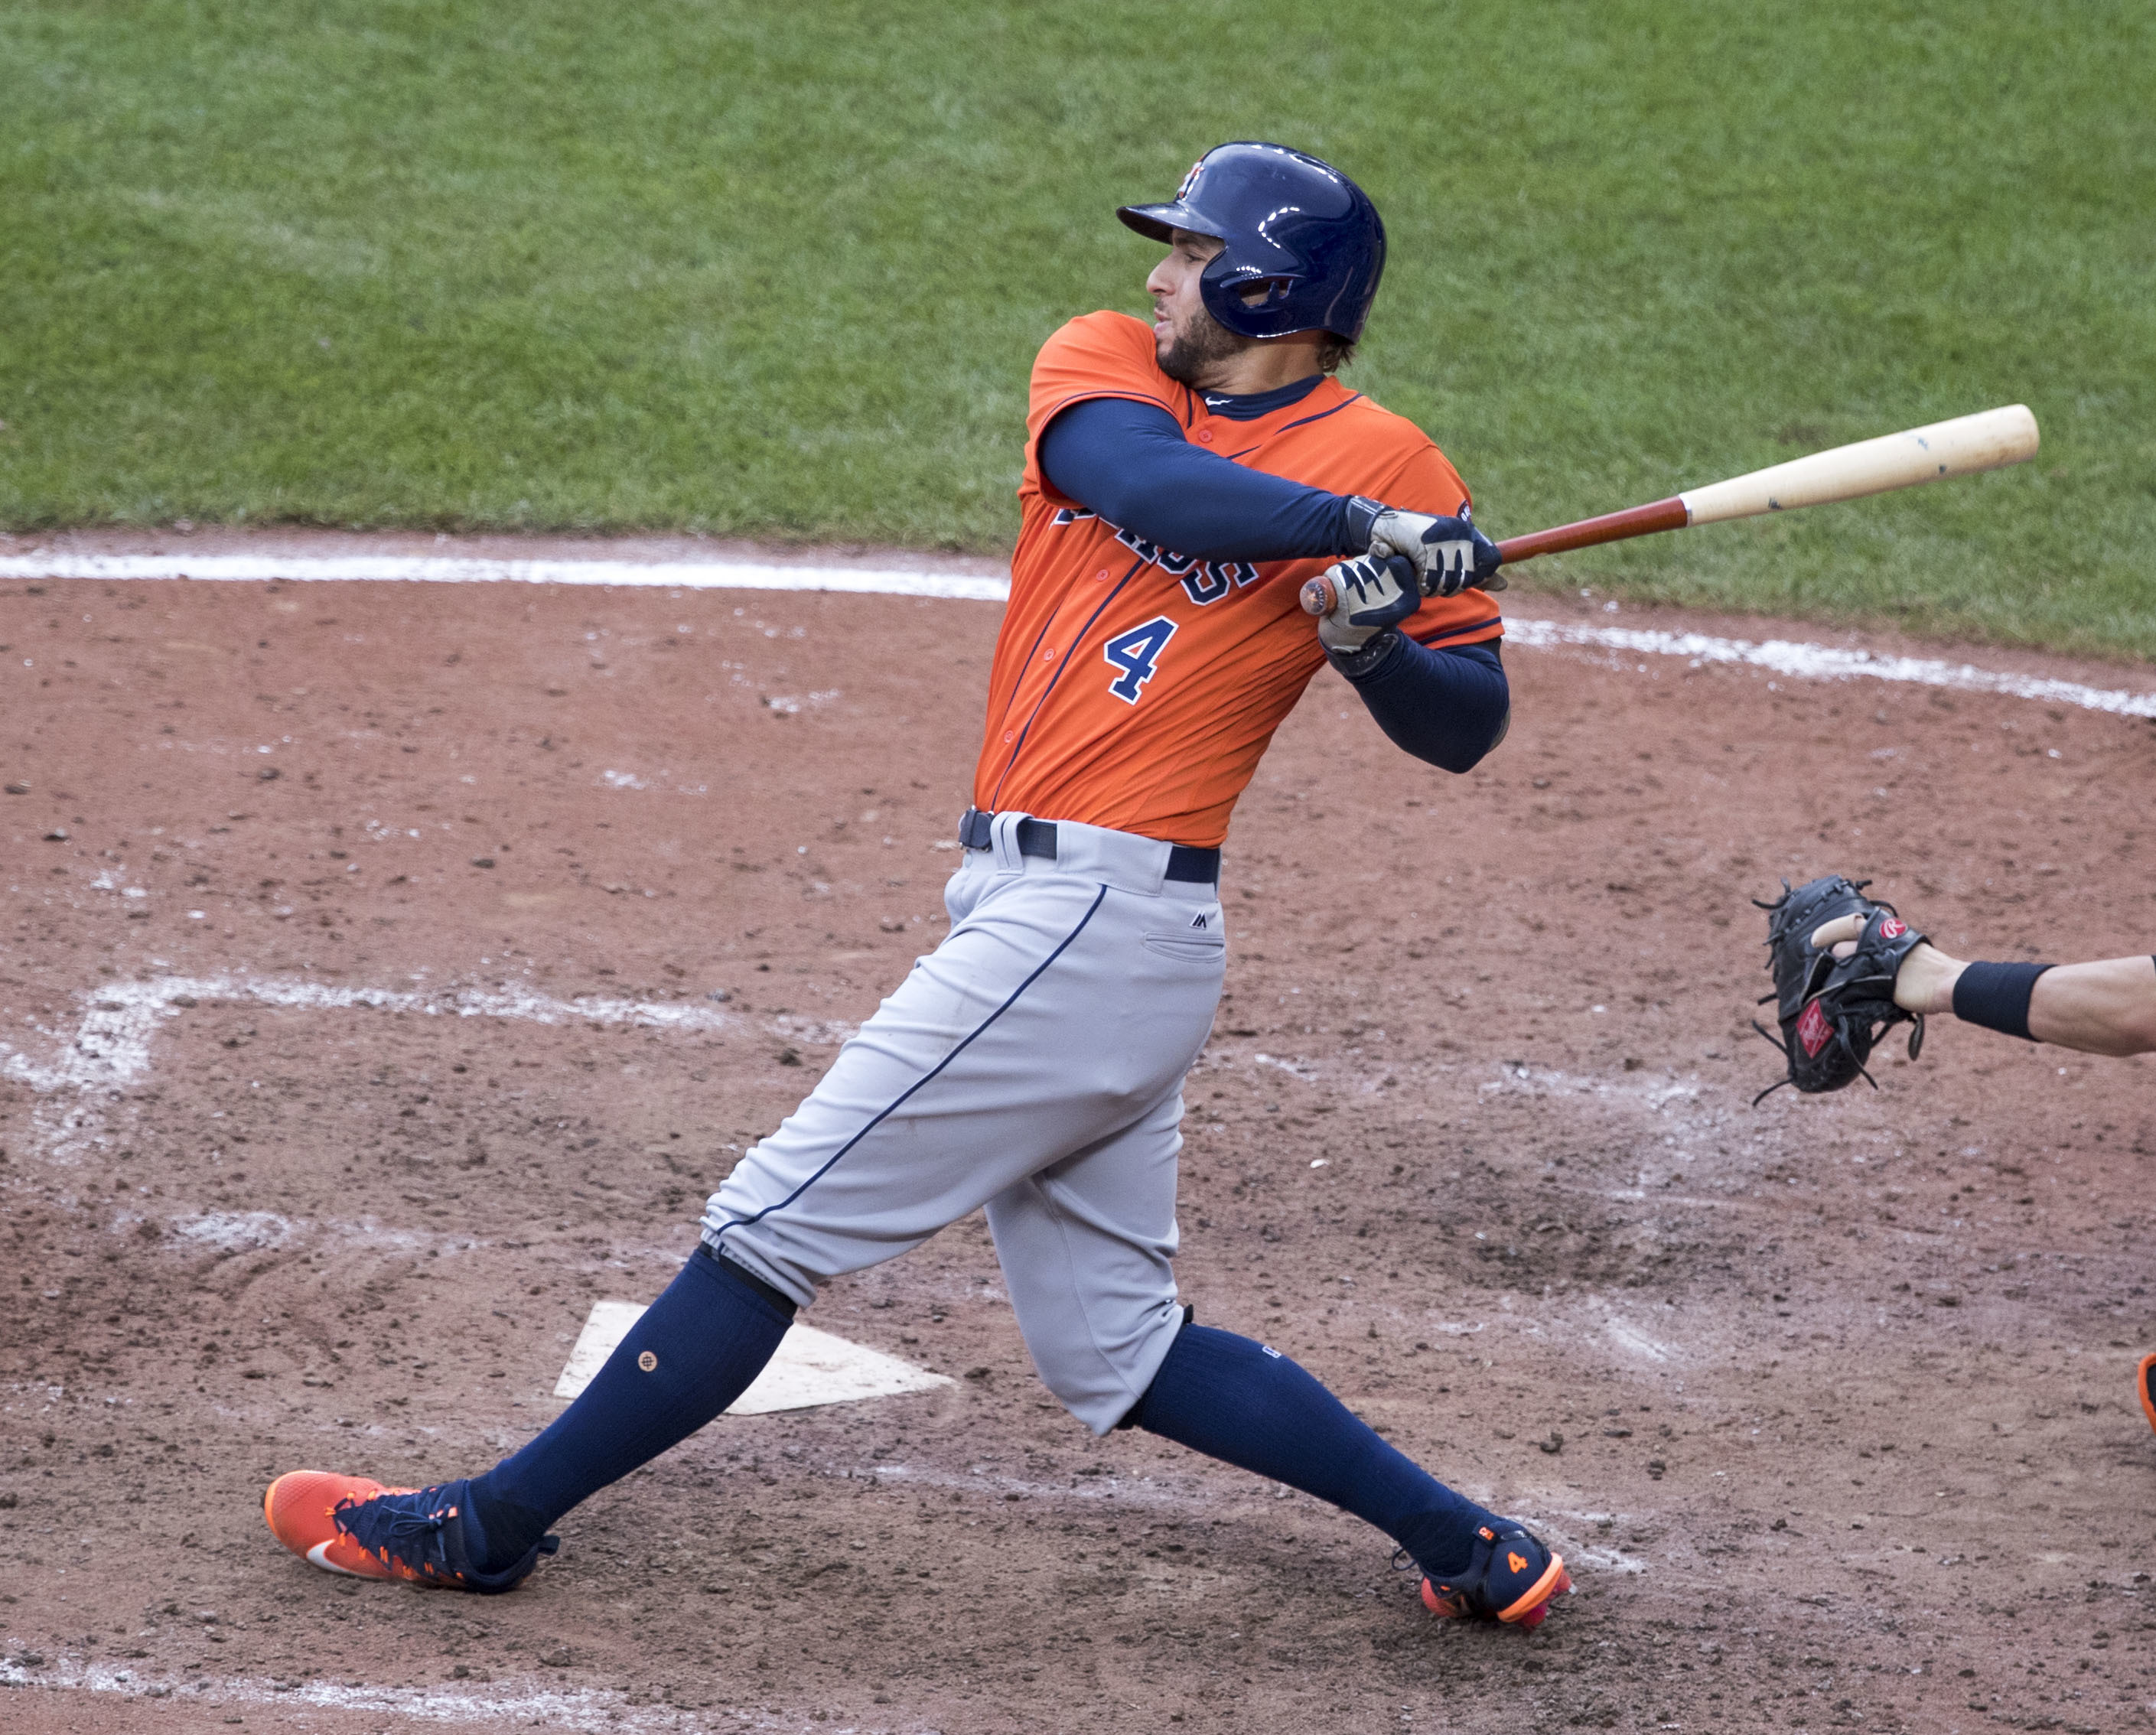 Springer's 10th-inning homer hauls Astros past Brewers